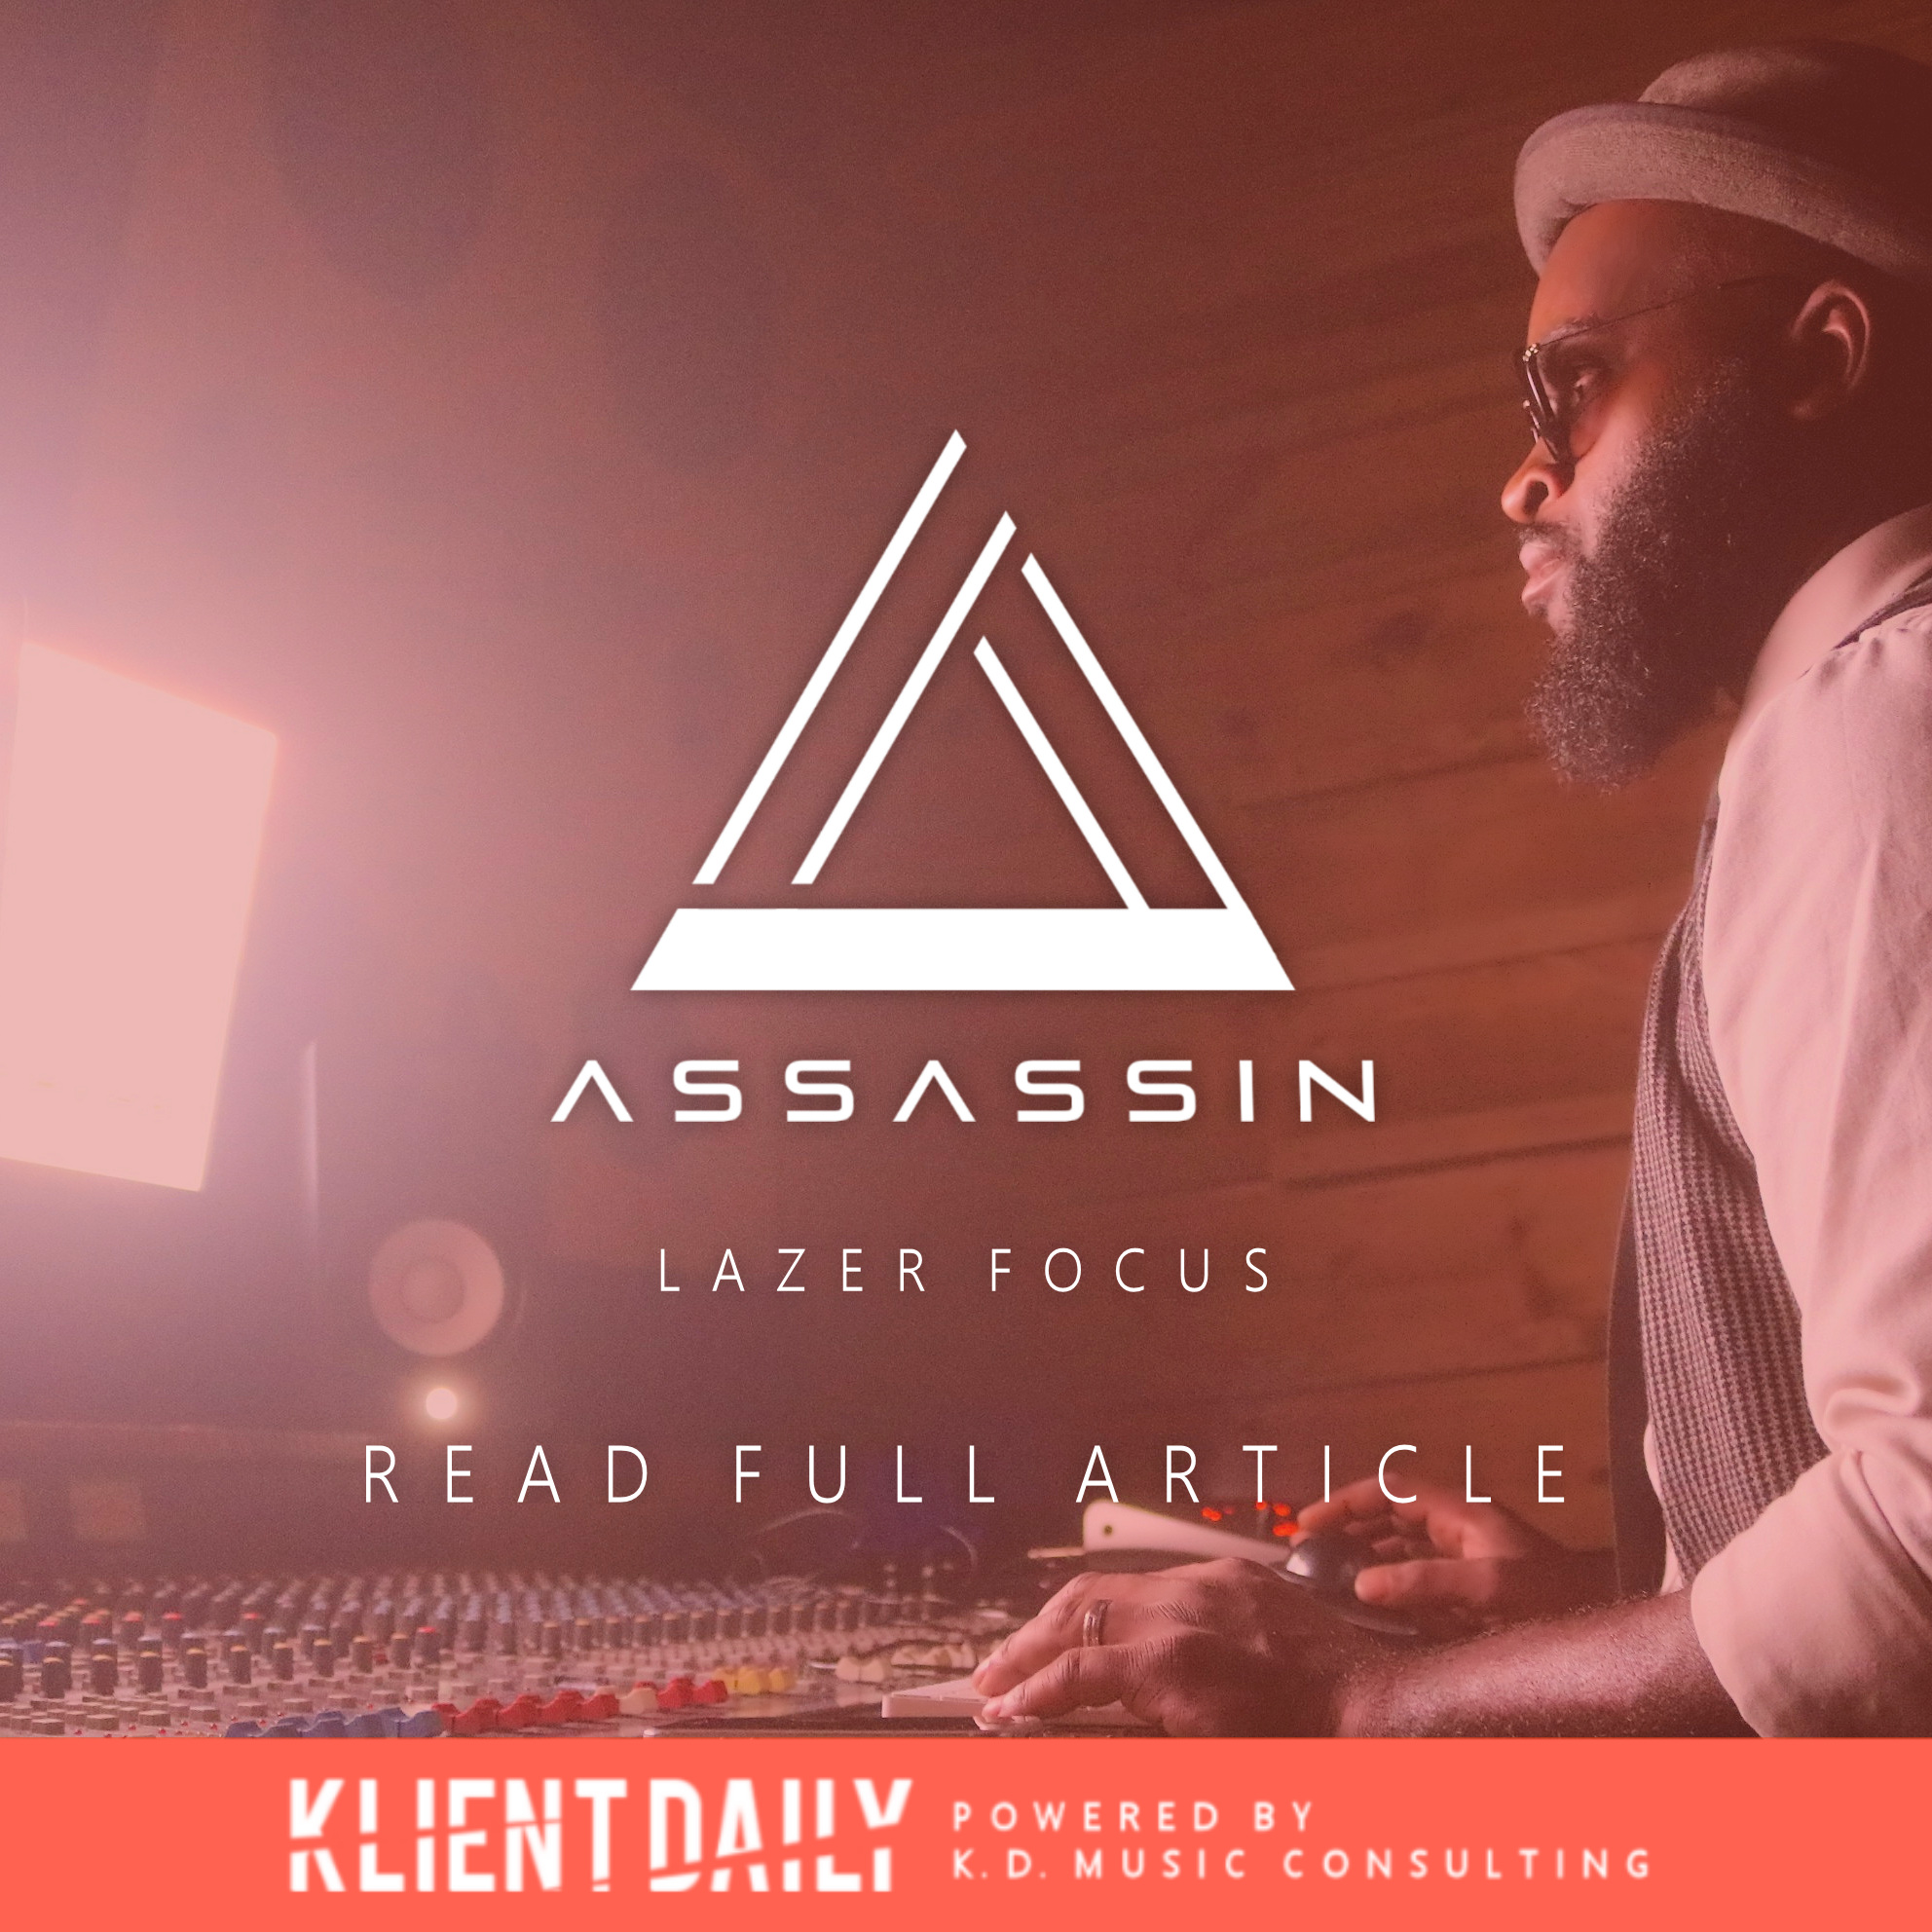 Assassin Inc KlientDaily Article cover.jpg